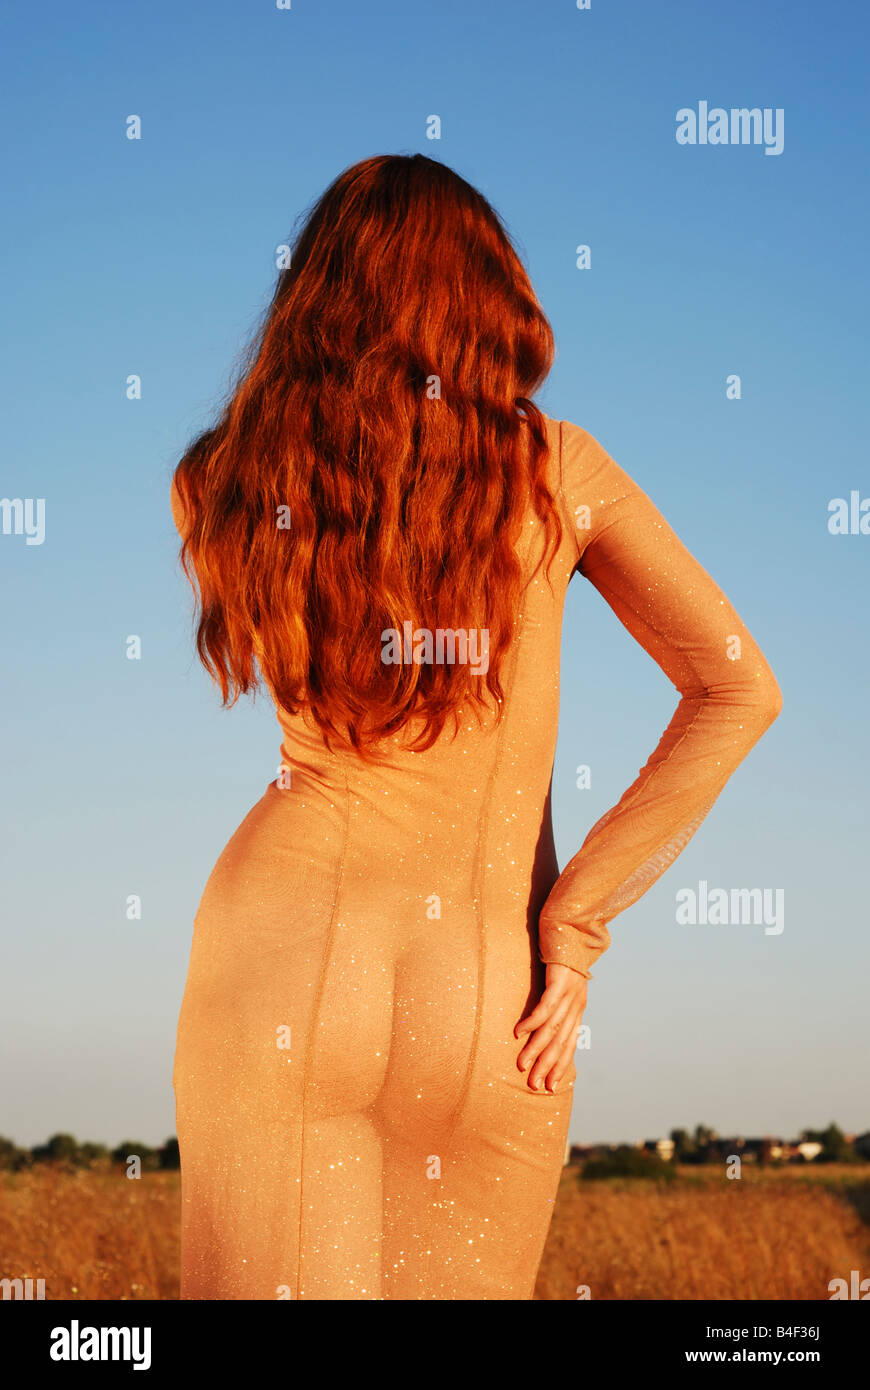 Long-haired girl in transparent beige dress stands back against sky and field, right hand on hip, warm tint of summer sunset Stock Photo